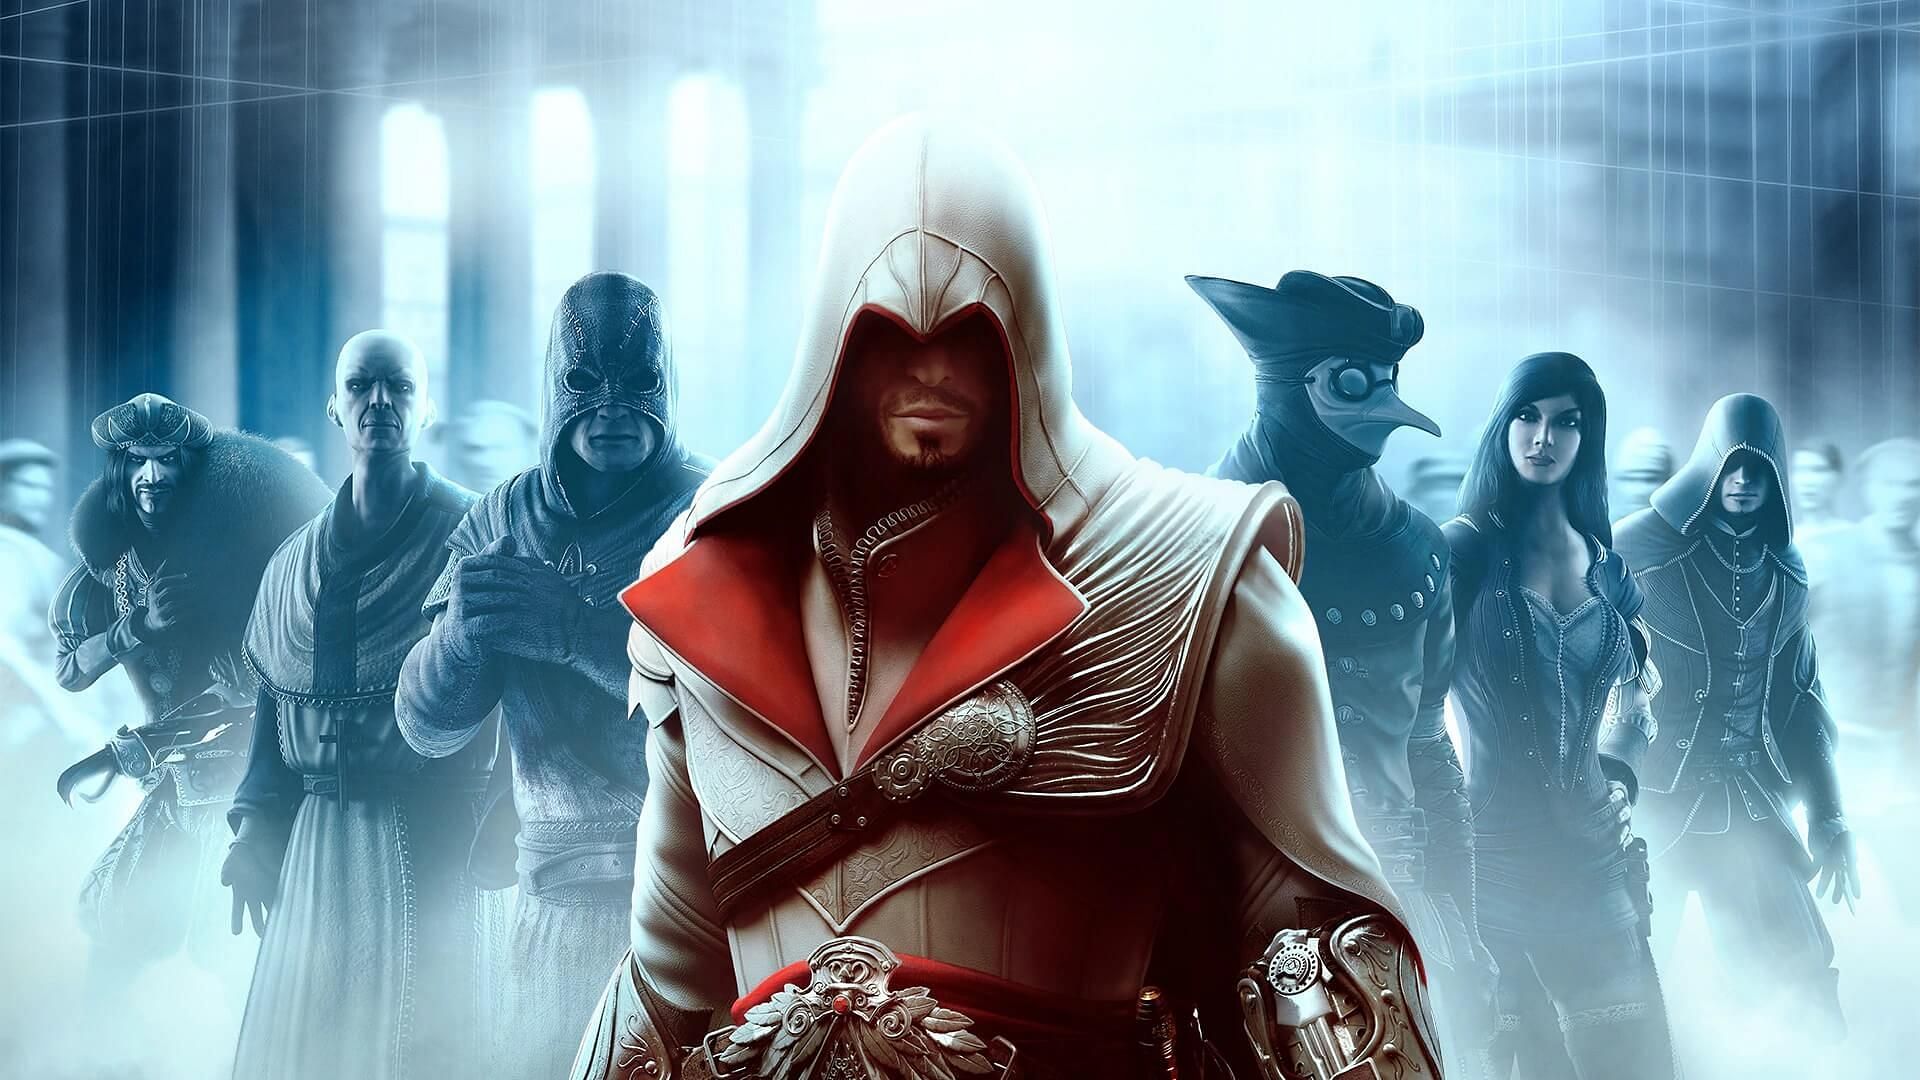 Ranking all the Assassin